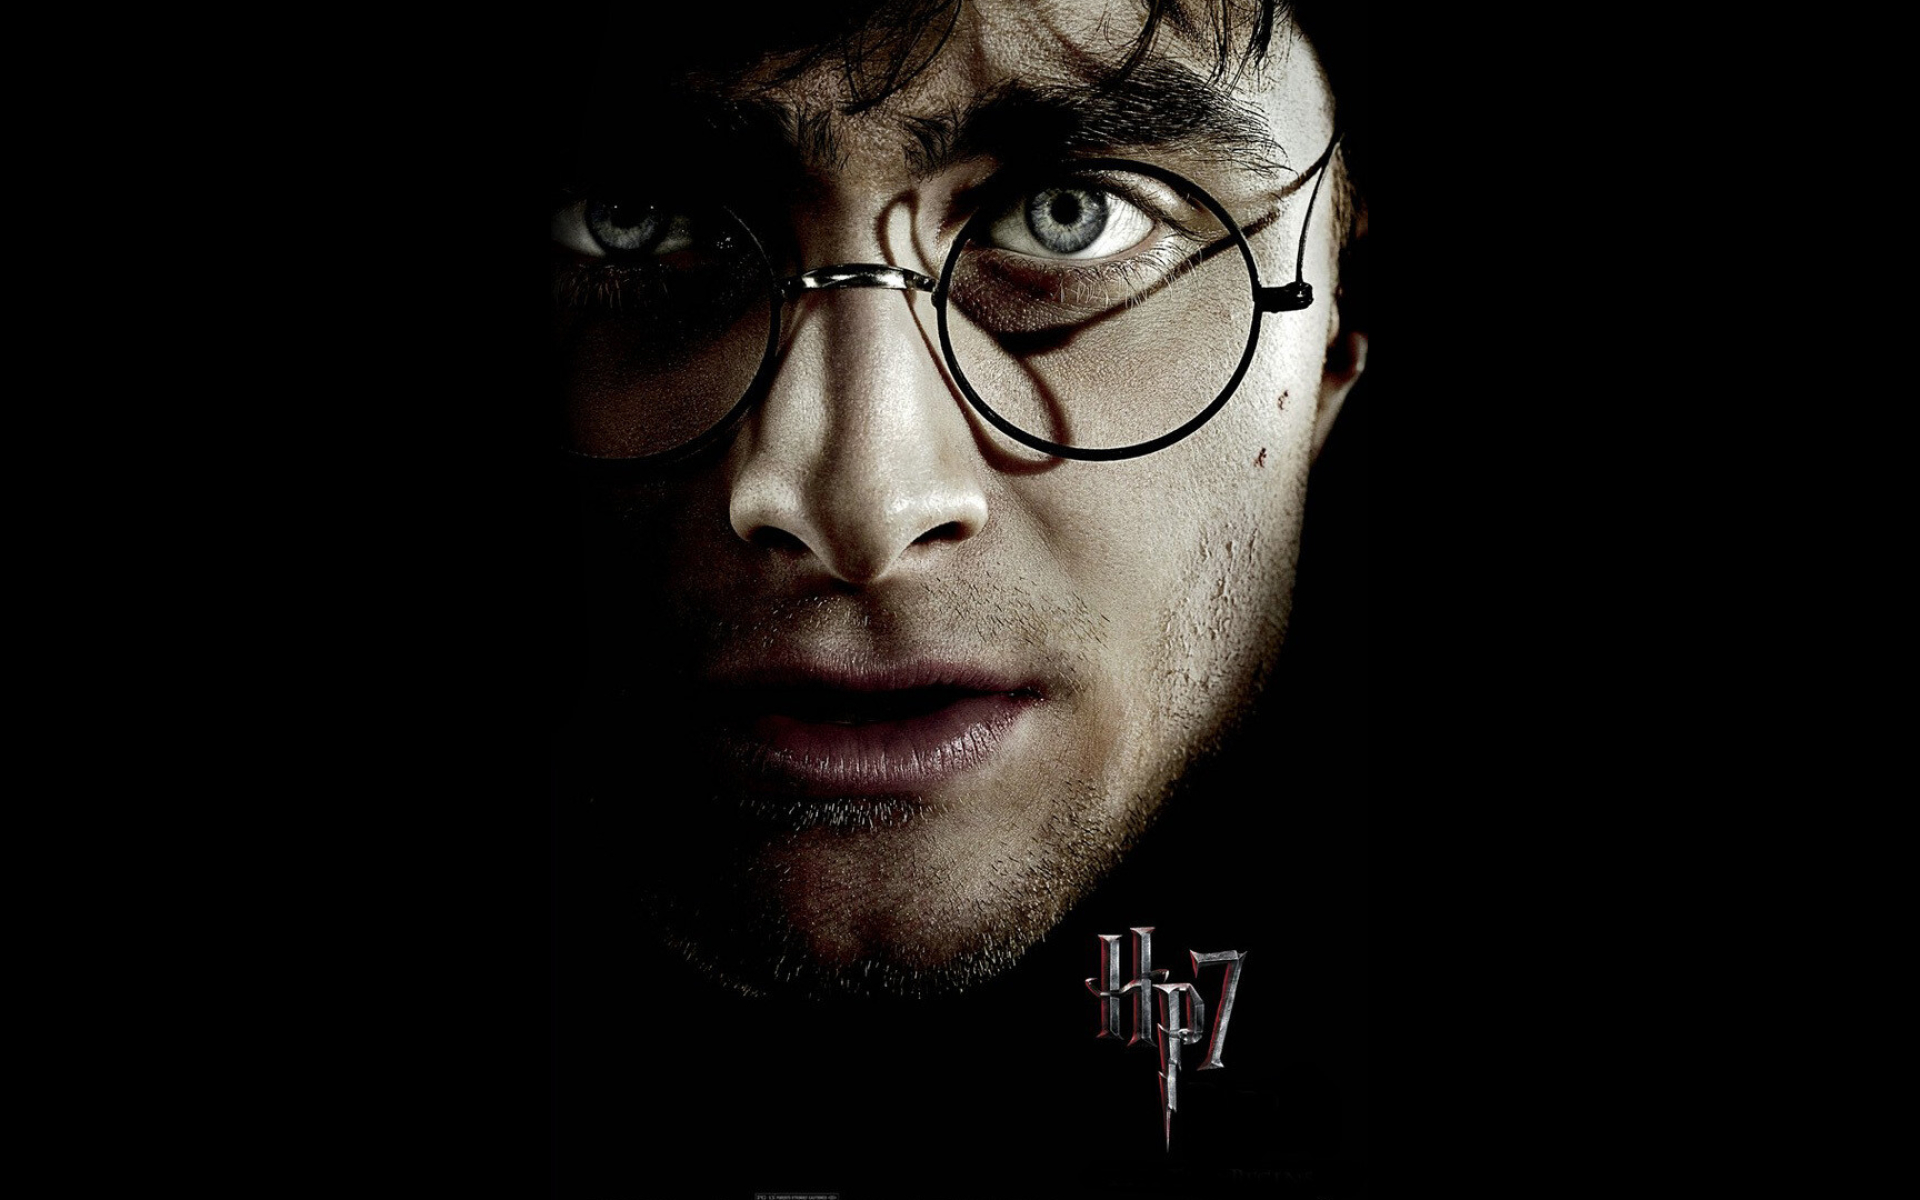 Harry Potter: HP7, The Deathly Hallows: Part 2, Directed by David Yates. 1920x1200 HD Background.